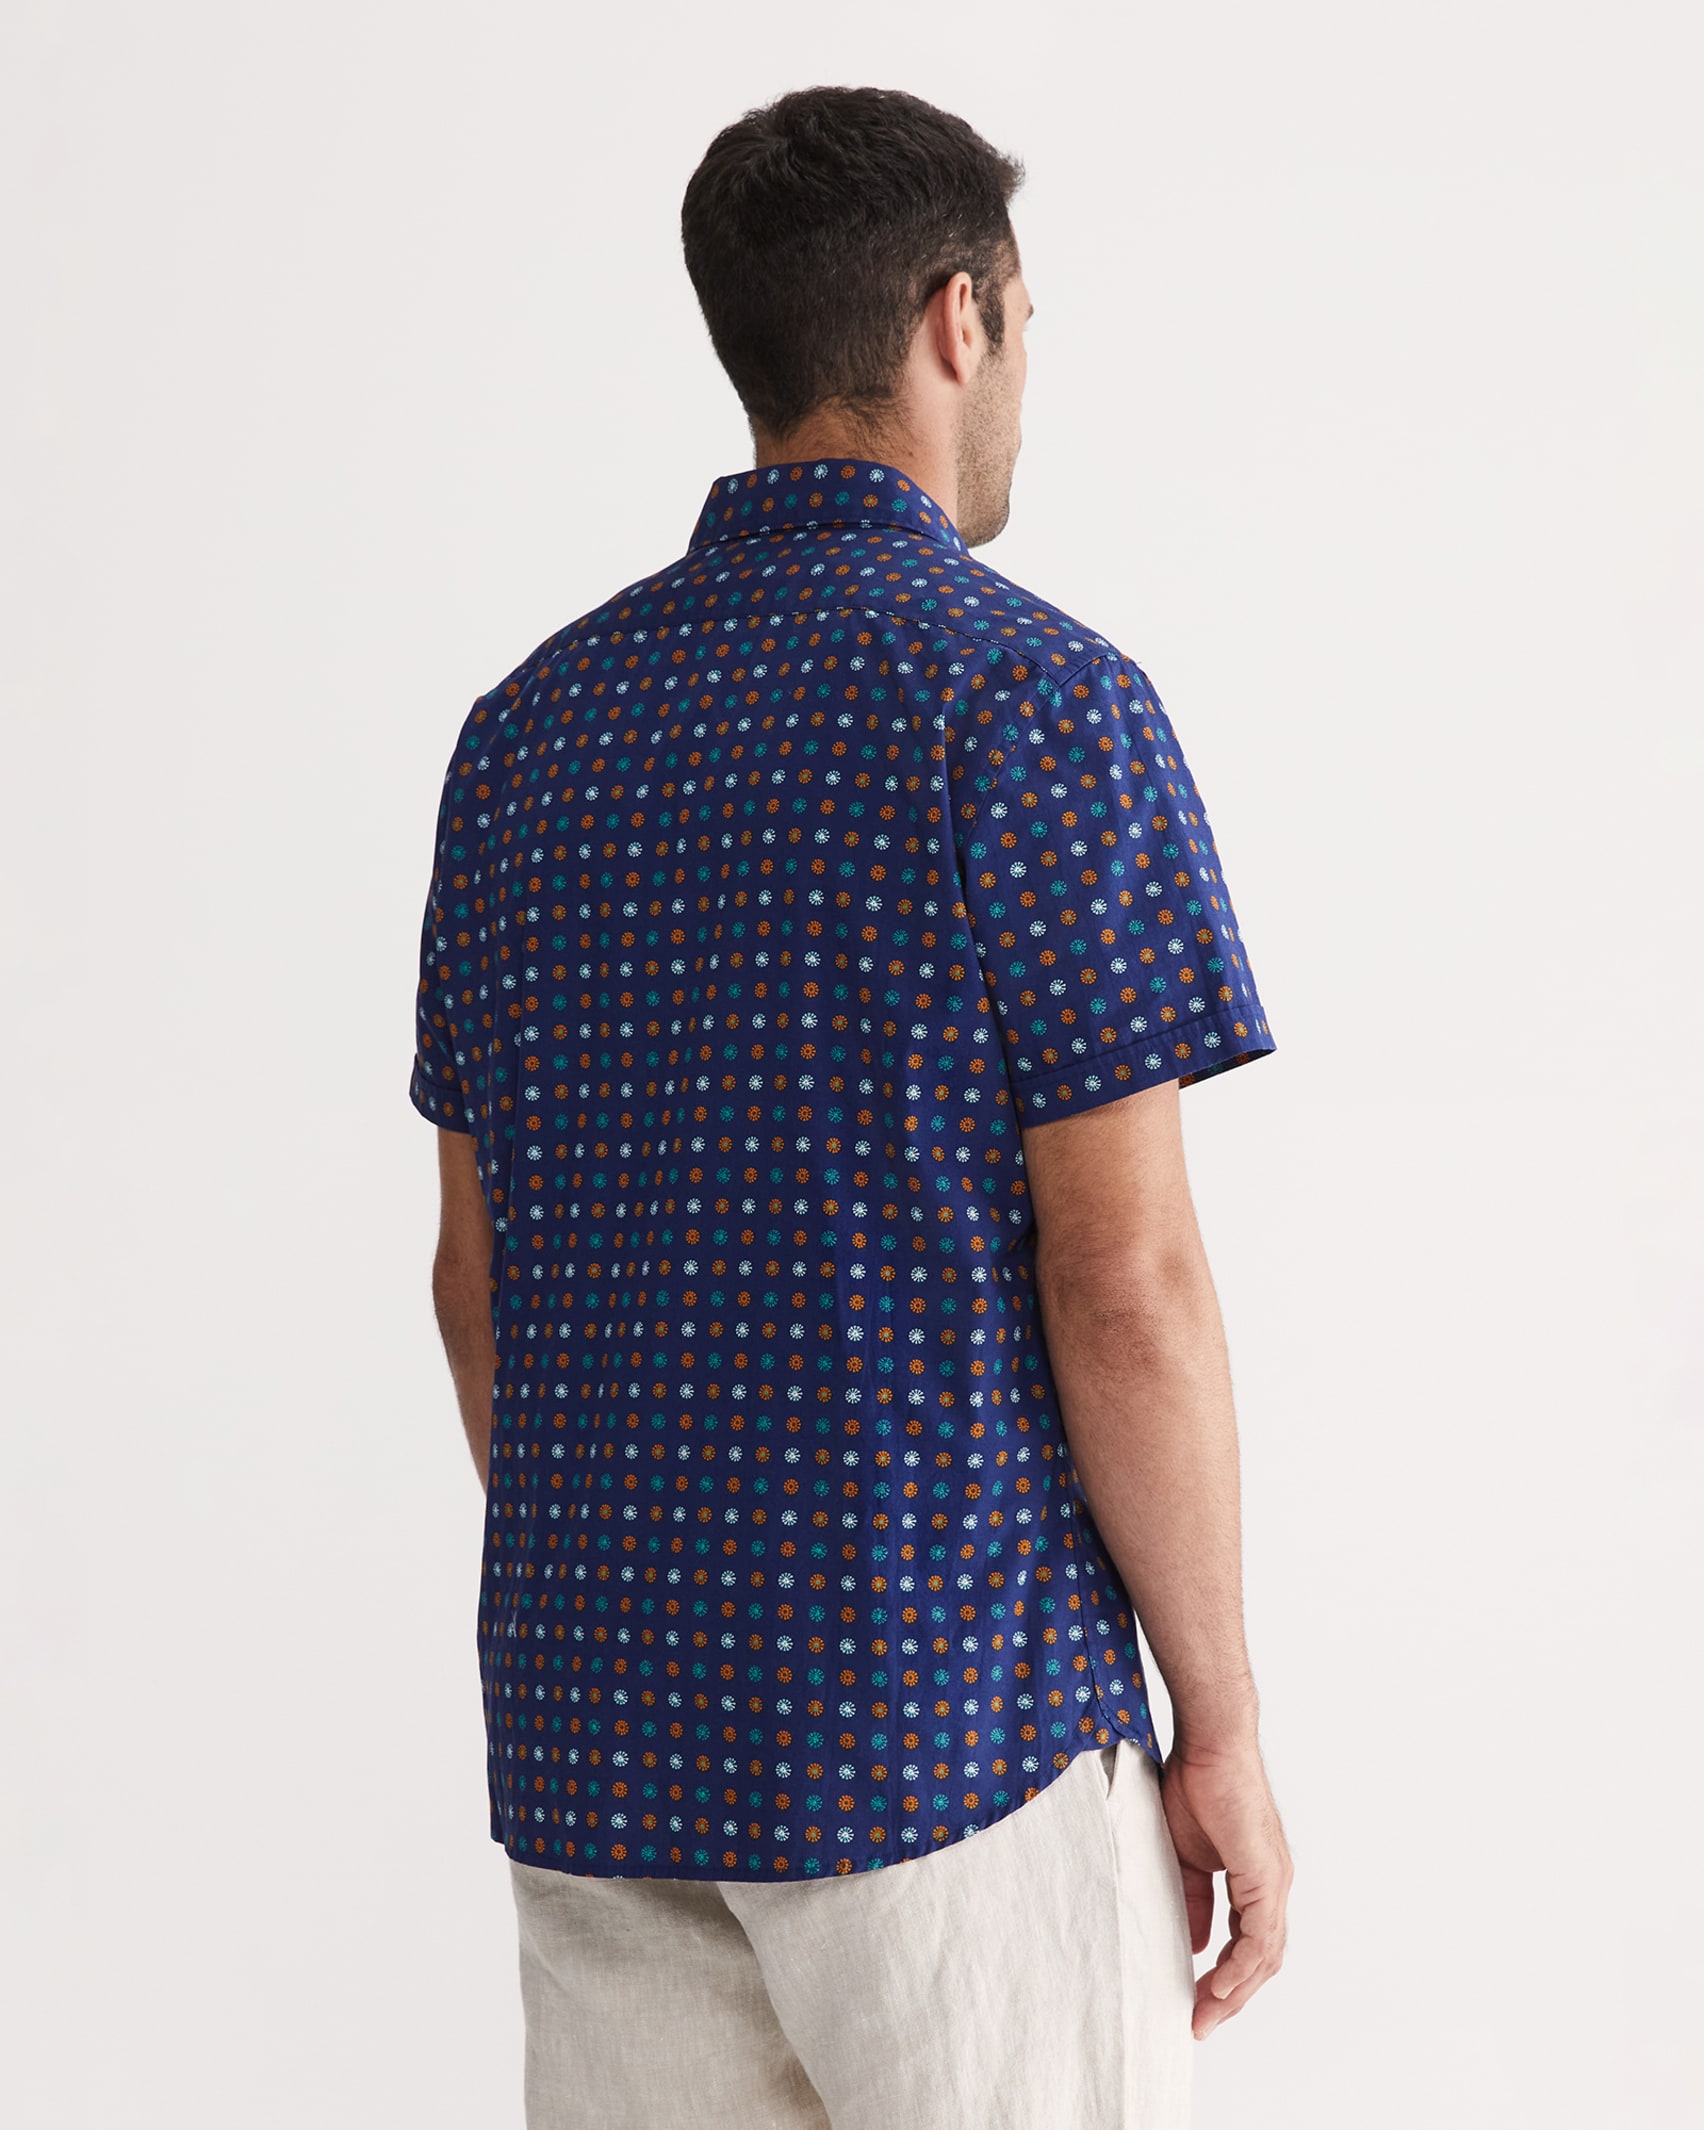 Le Vista Tapered Shirt in PRUSSIAN BLUE